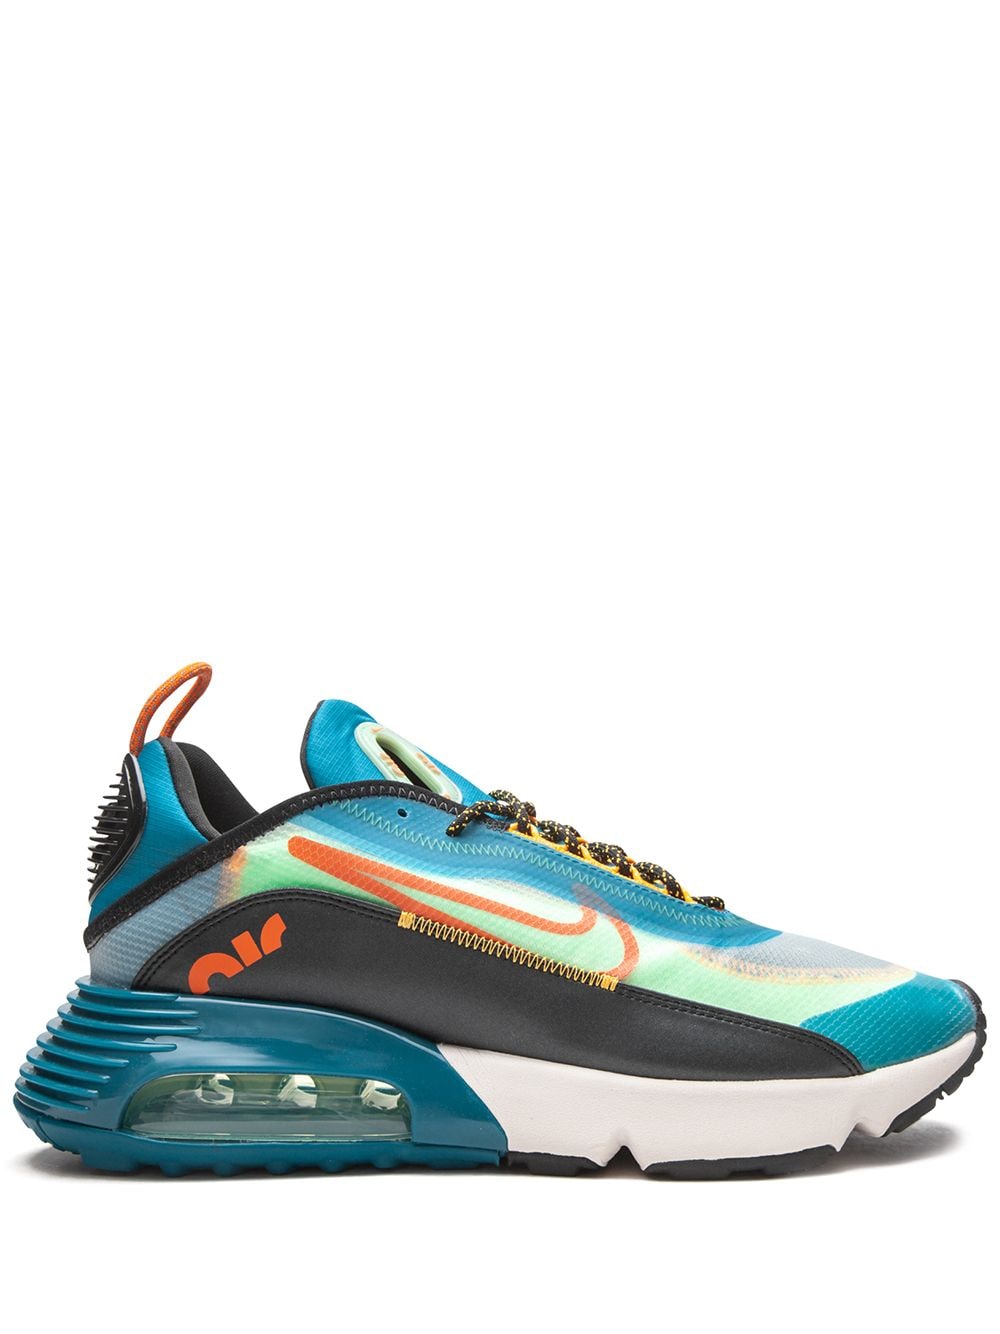 Nike Air Max 2090 "Green Abyss" sneakers - Blue von Nike